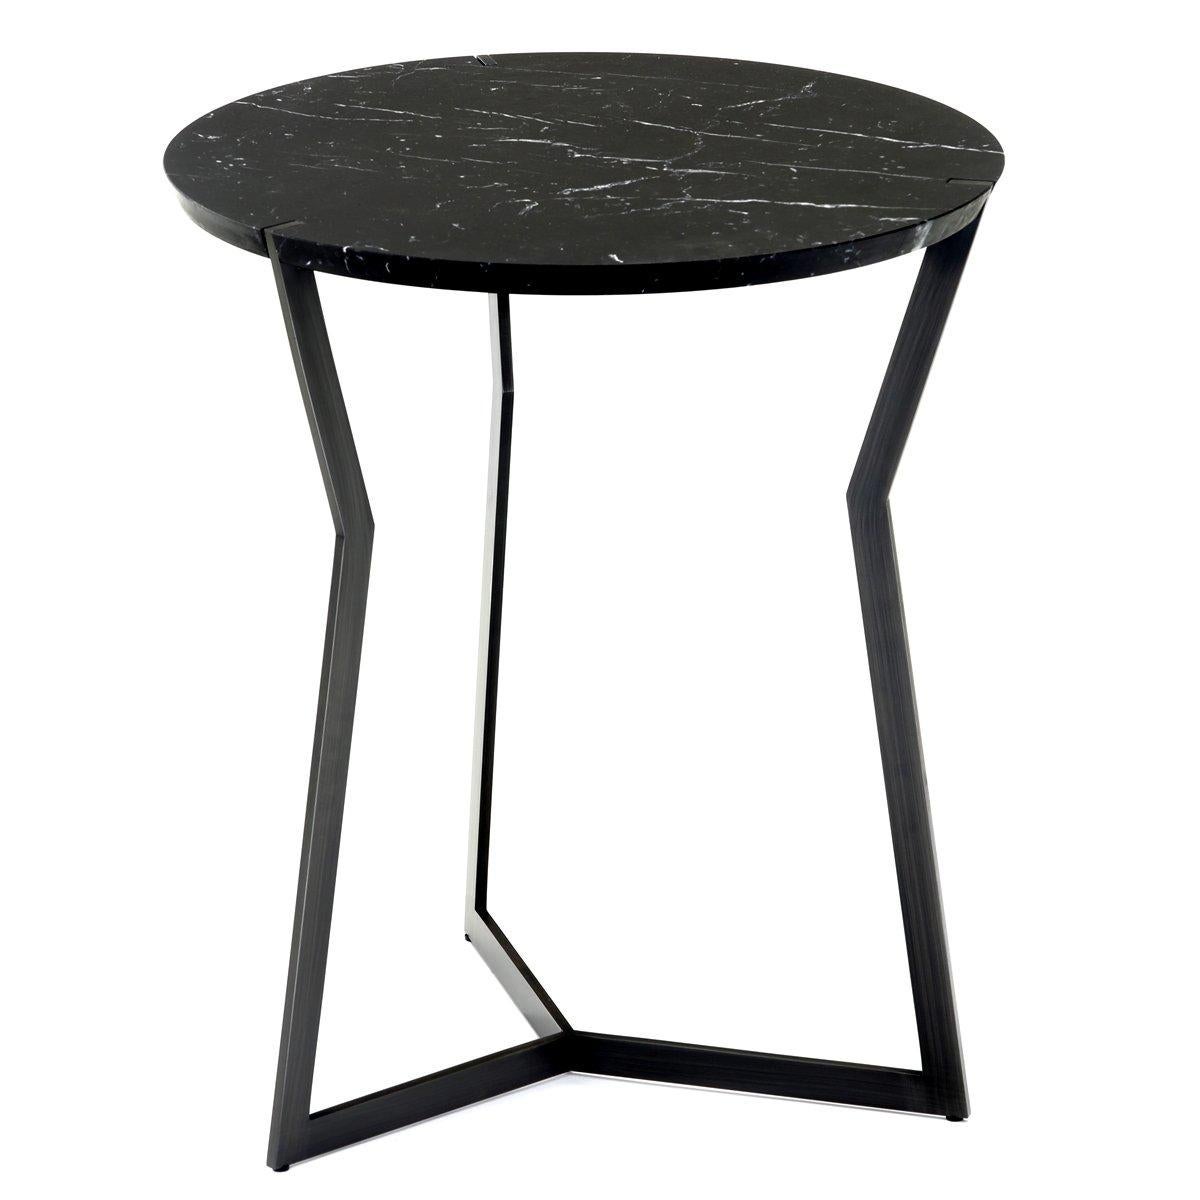 Nero marble star side table by Olivier Gagnère
Materials: pedestal table, 20mm Carrara or Marquina marble top. Base in black bronze finish or gold lacquered metal.
Technique: lacquered metal, polished marble. 
Dimensions: diameter 50 x height 57